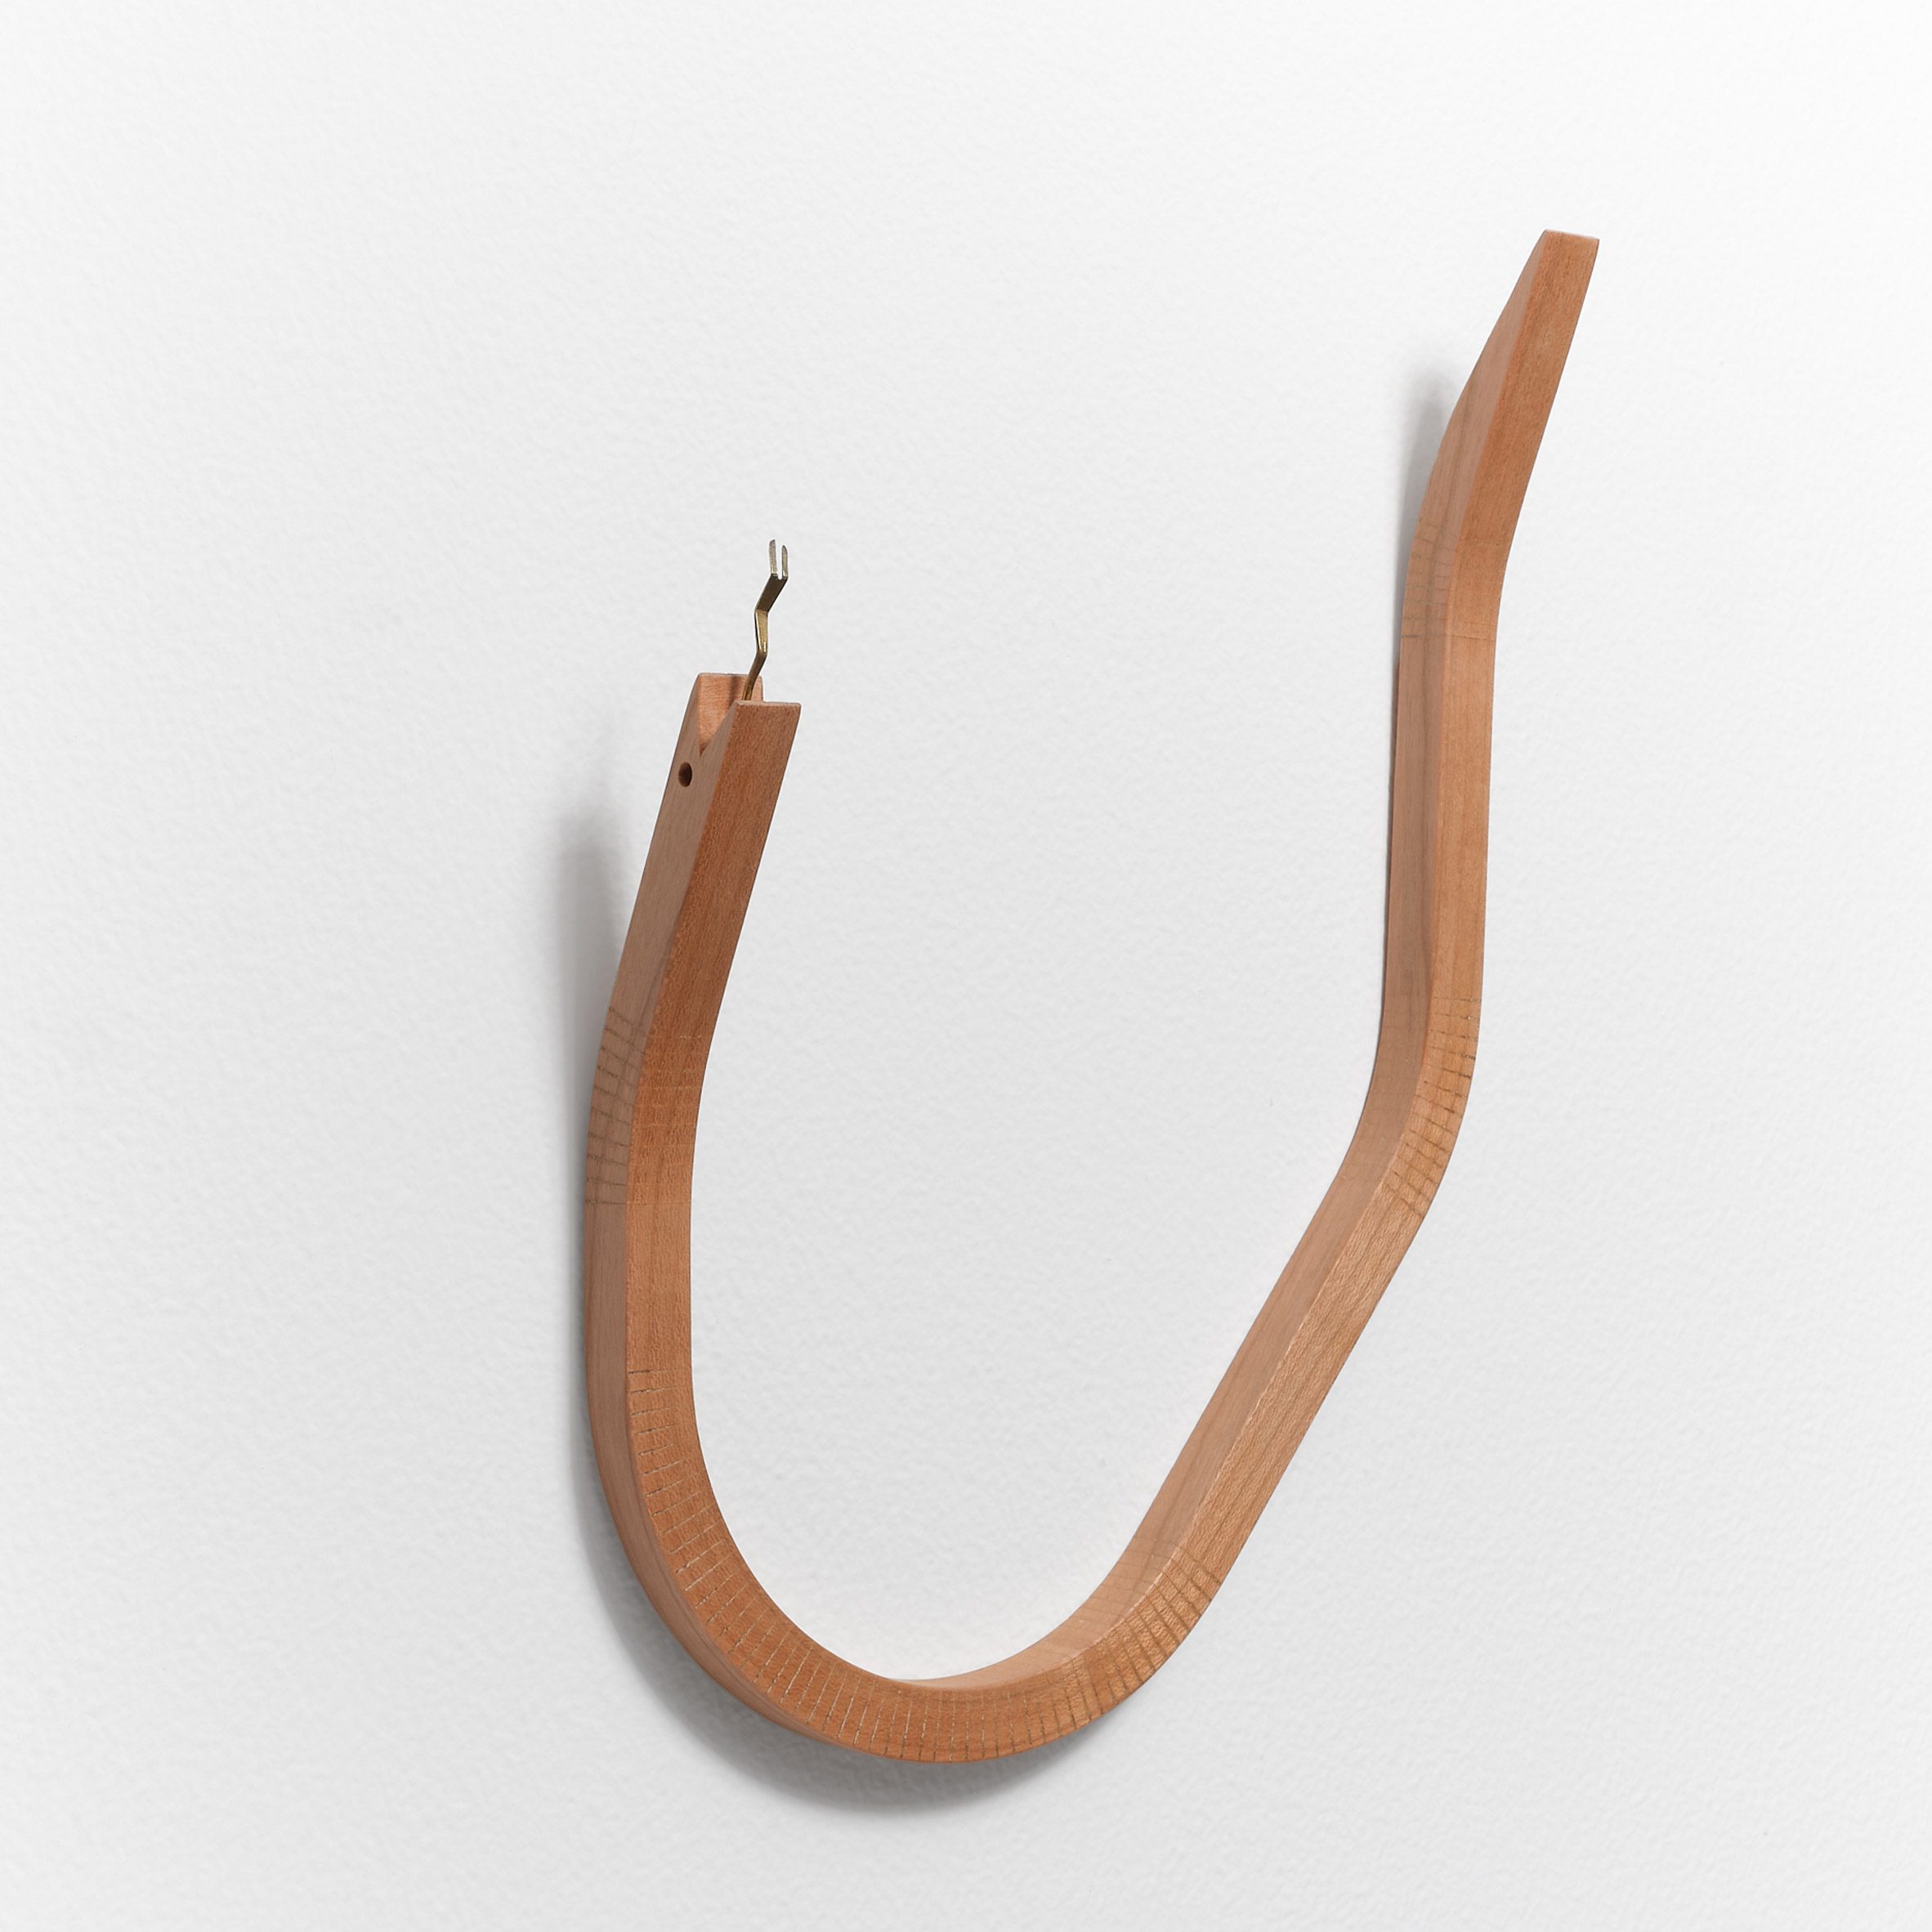 100 Hooks exhibition at Blunk Space features hooks from 100 designers